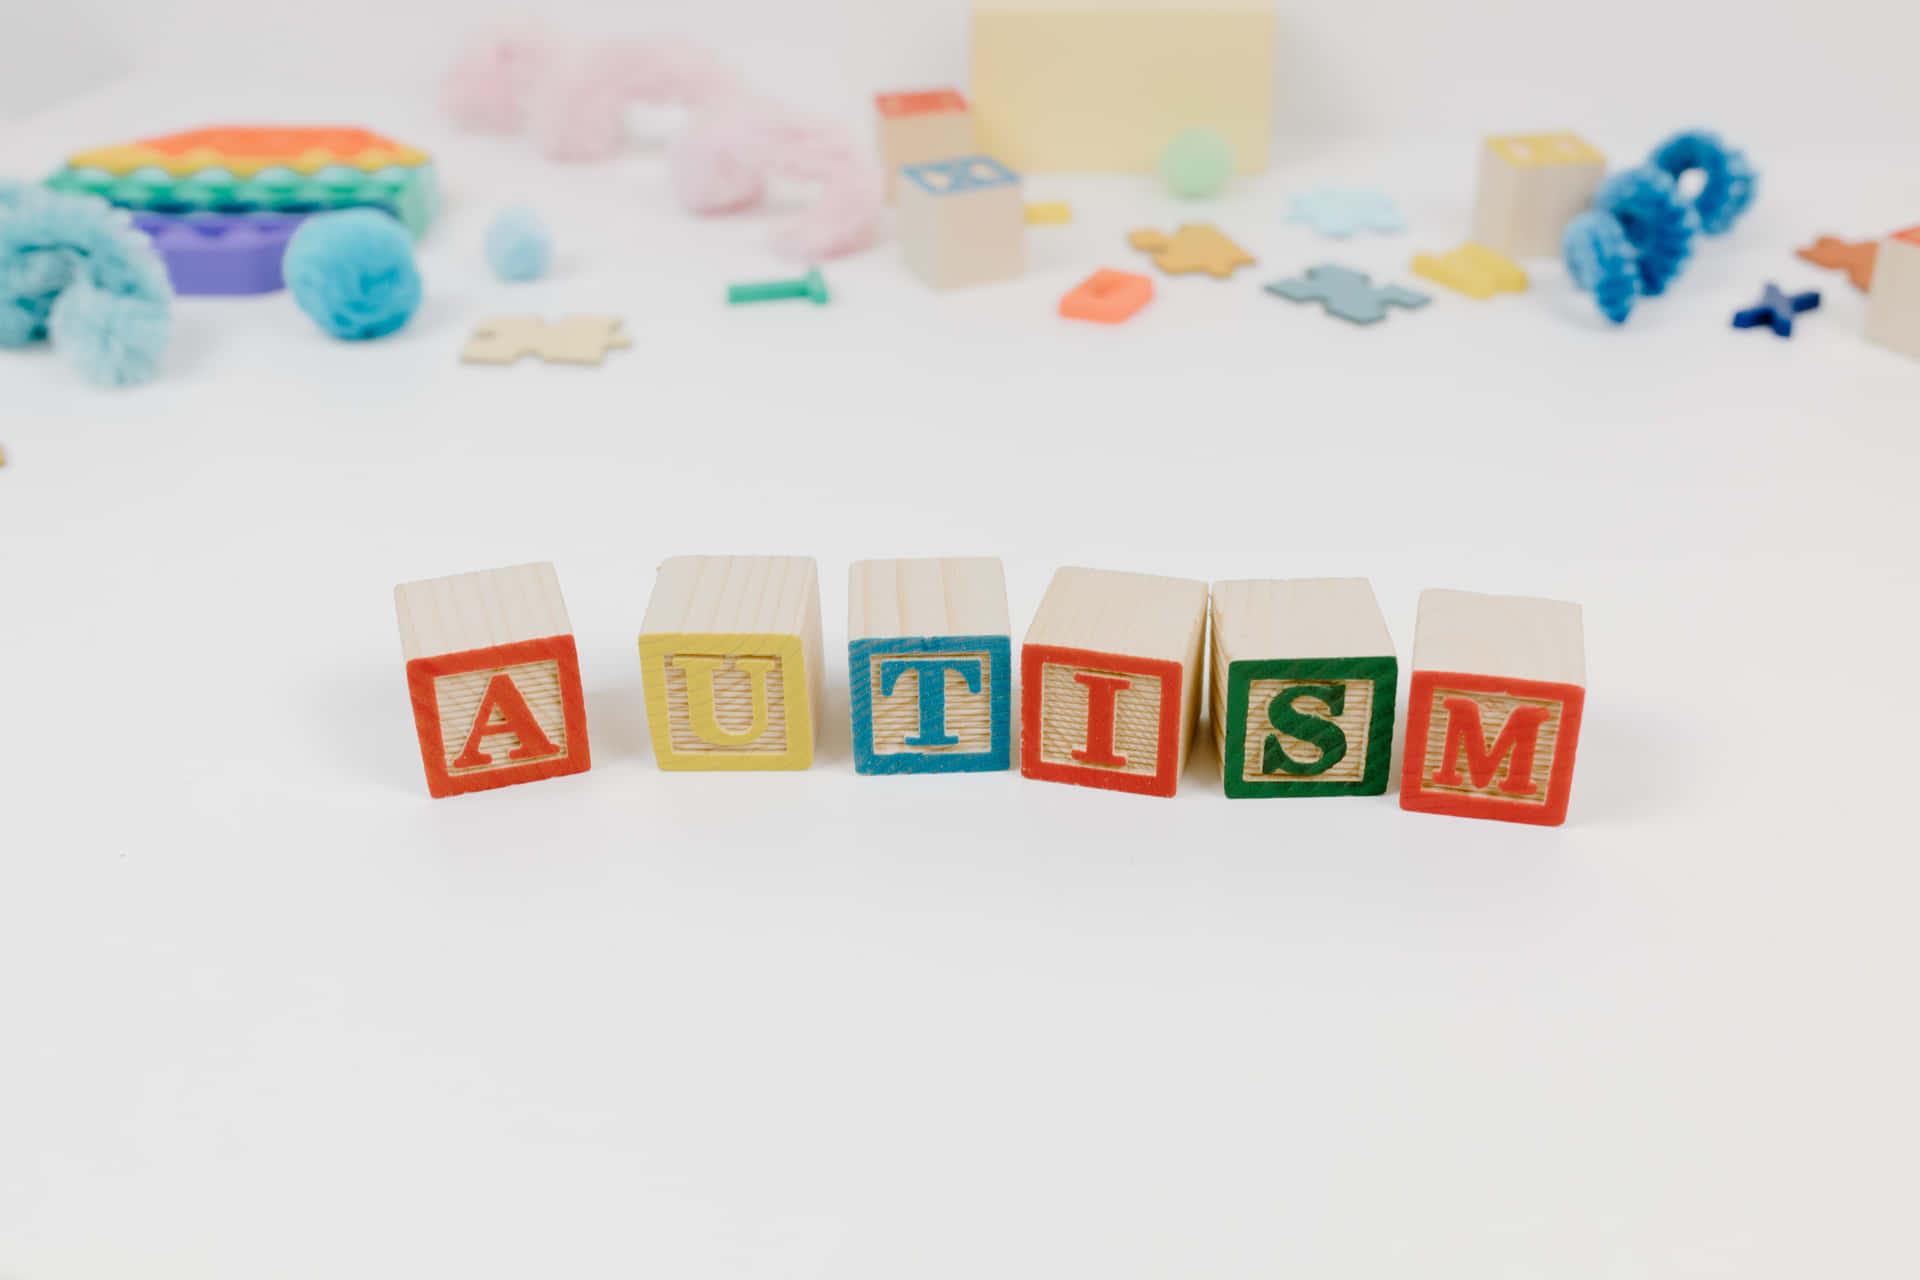 Autism Awareness - A Wooden Block With The Word Autism